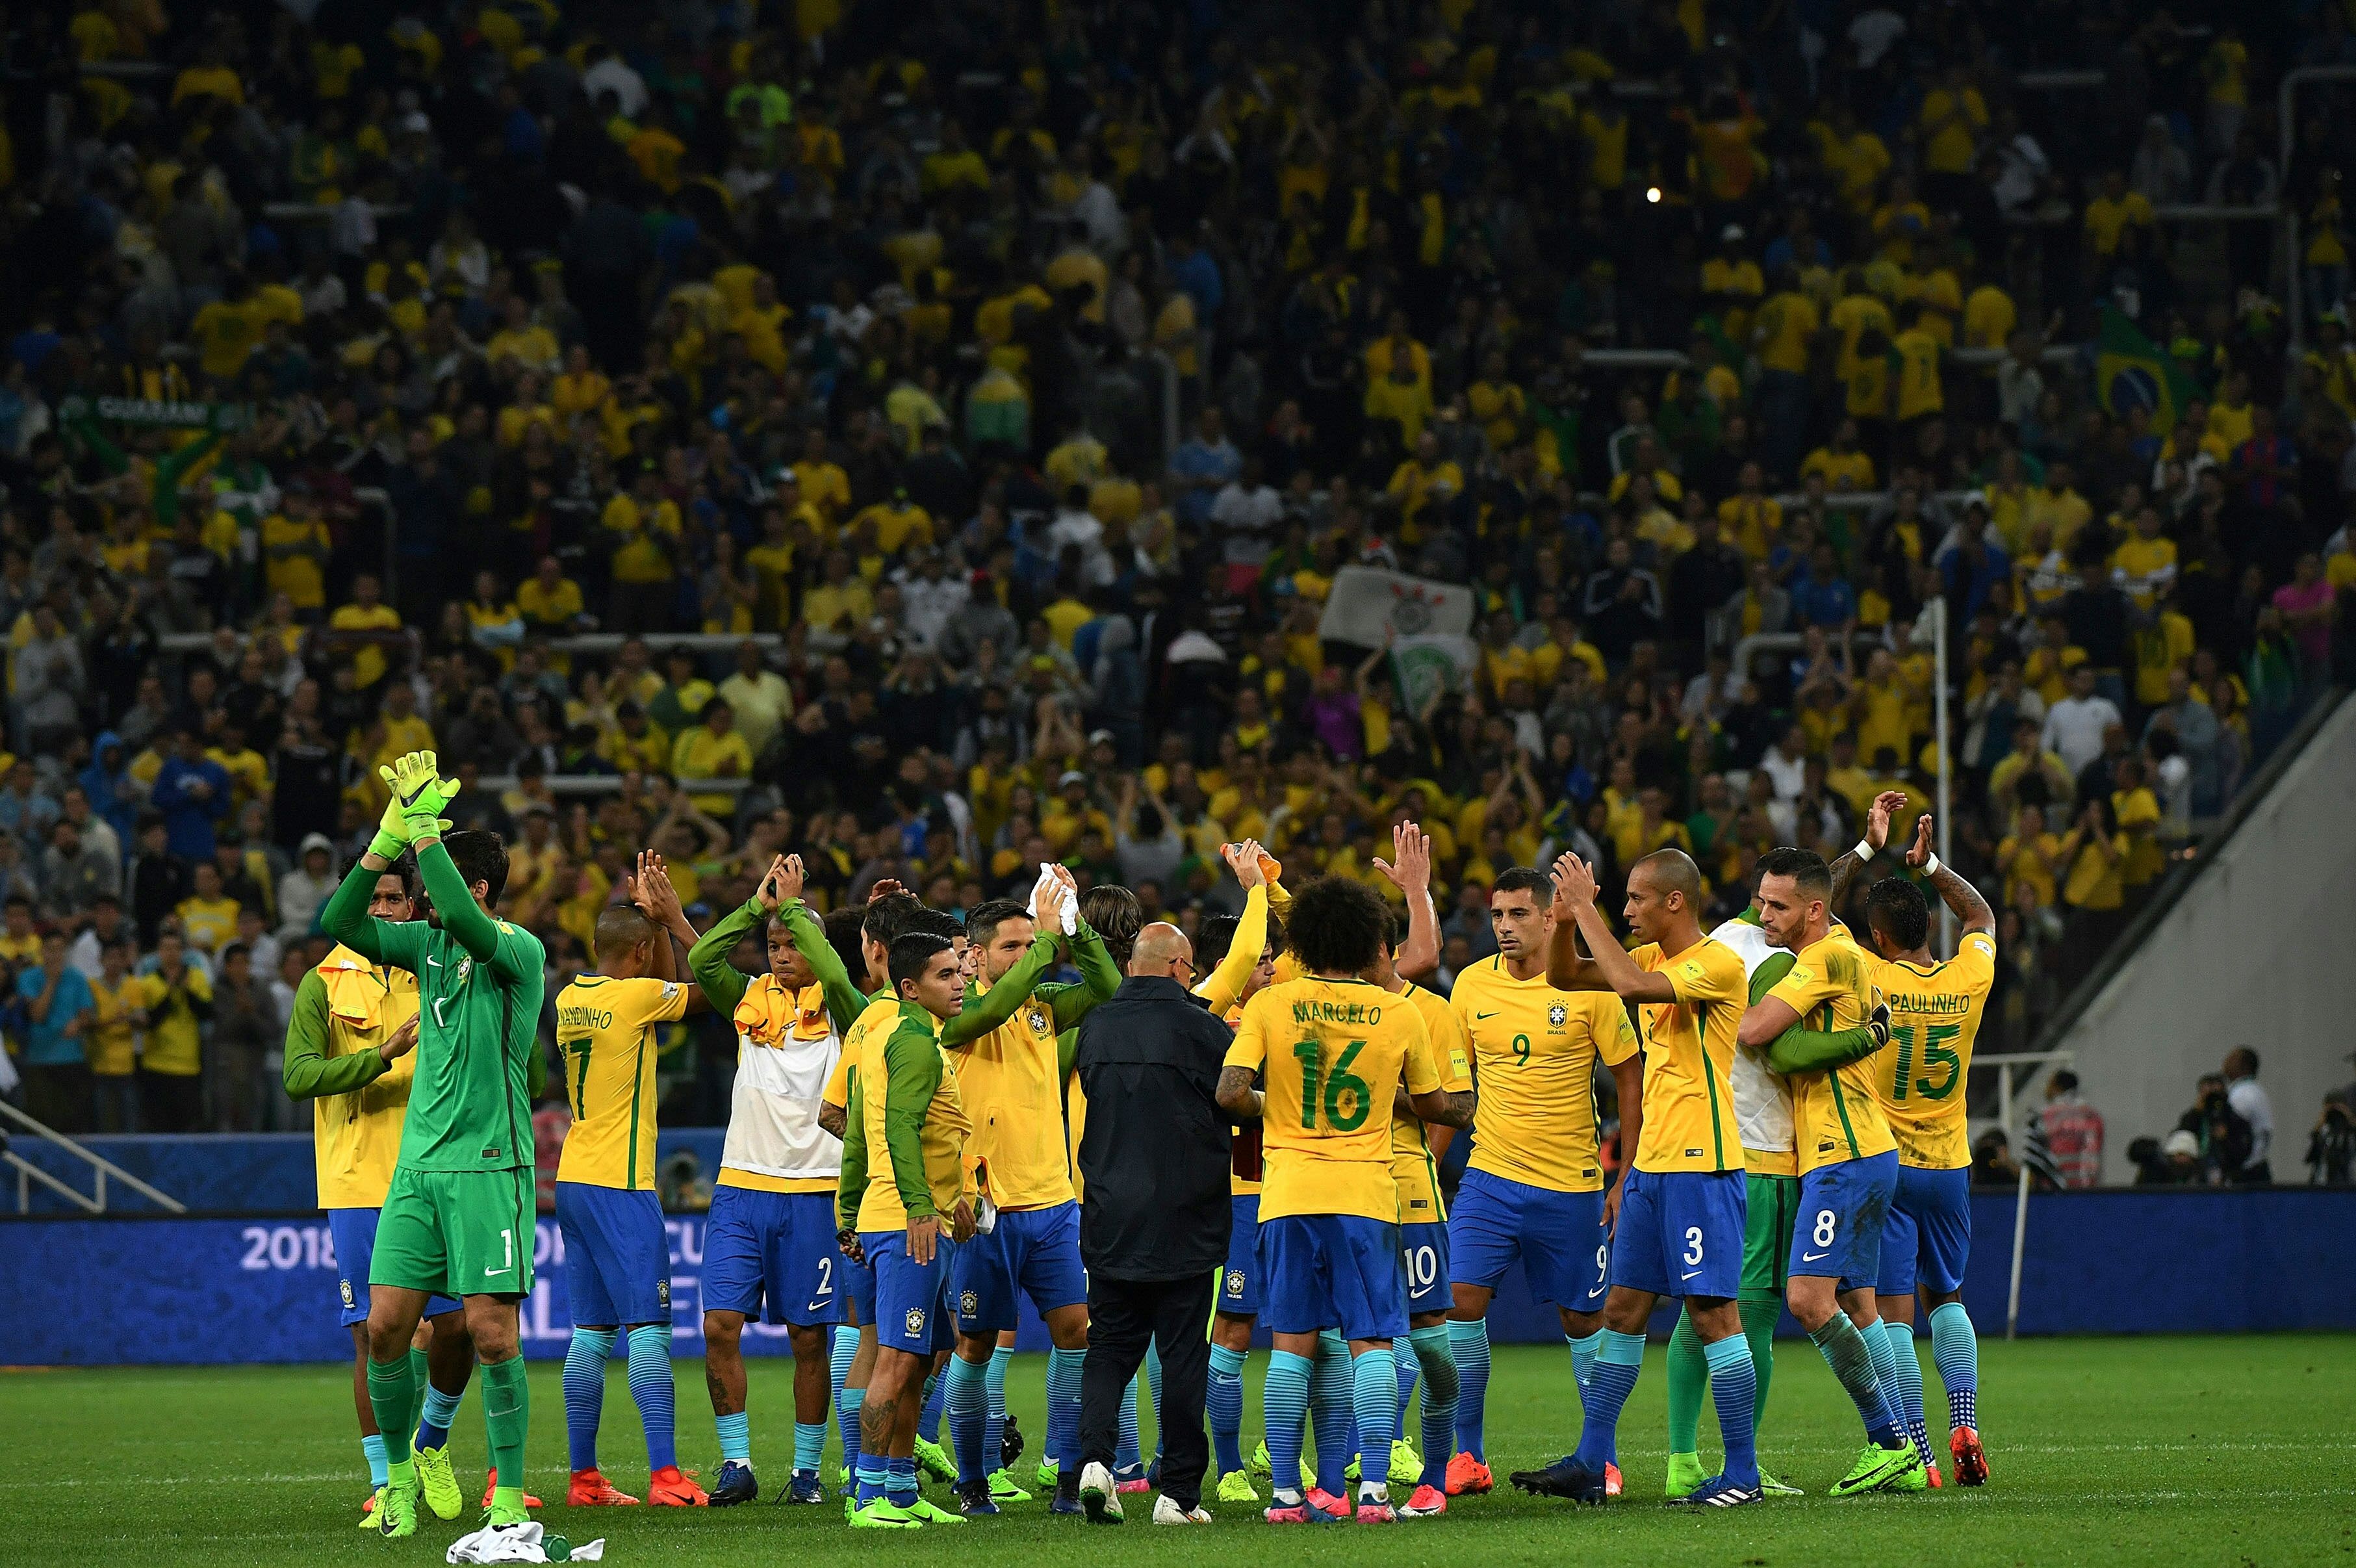 World Cup 2018 Group E Brazil team profile: How they qualified